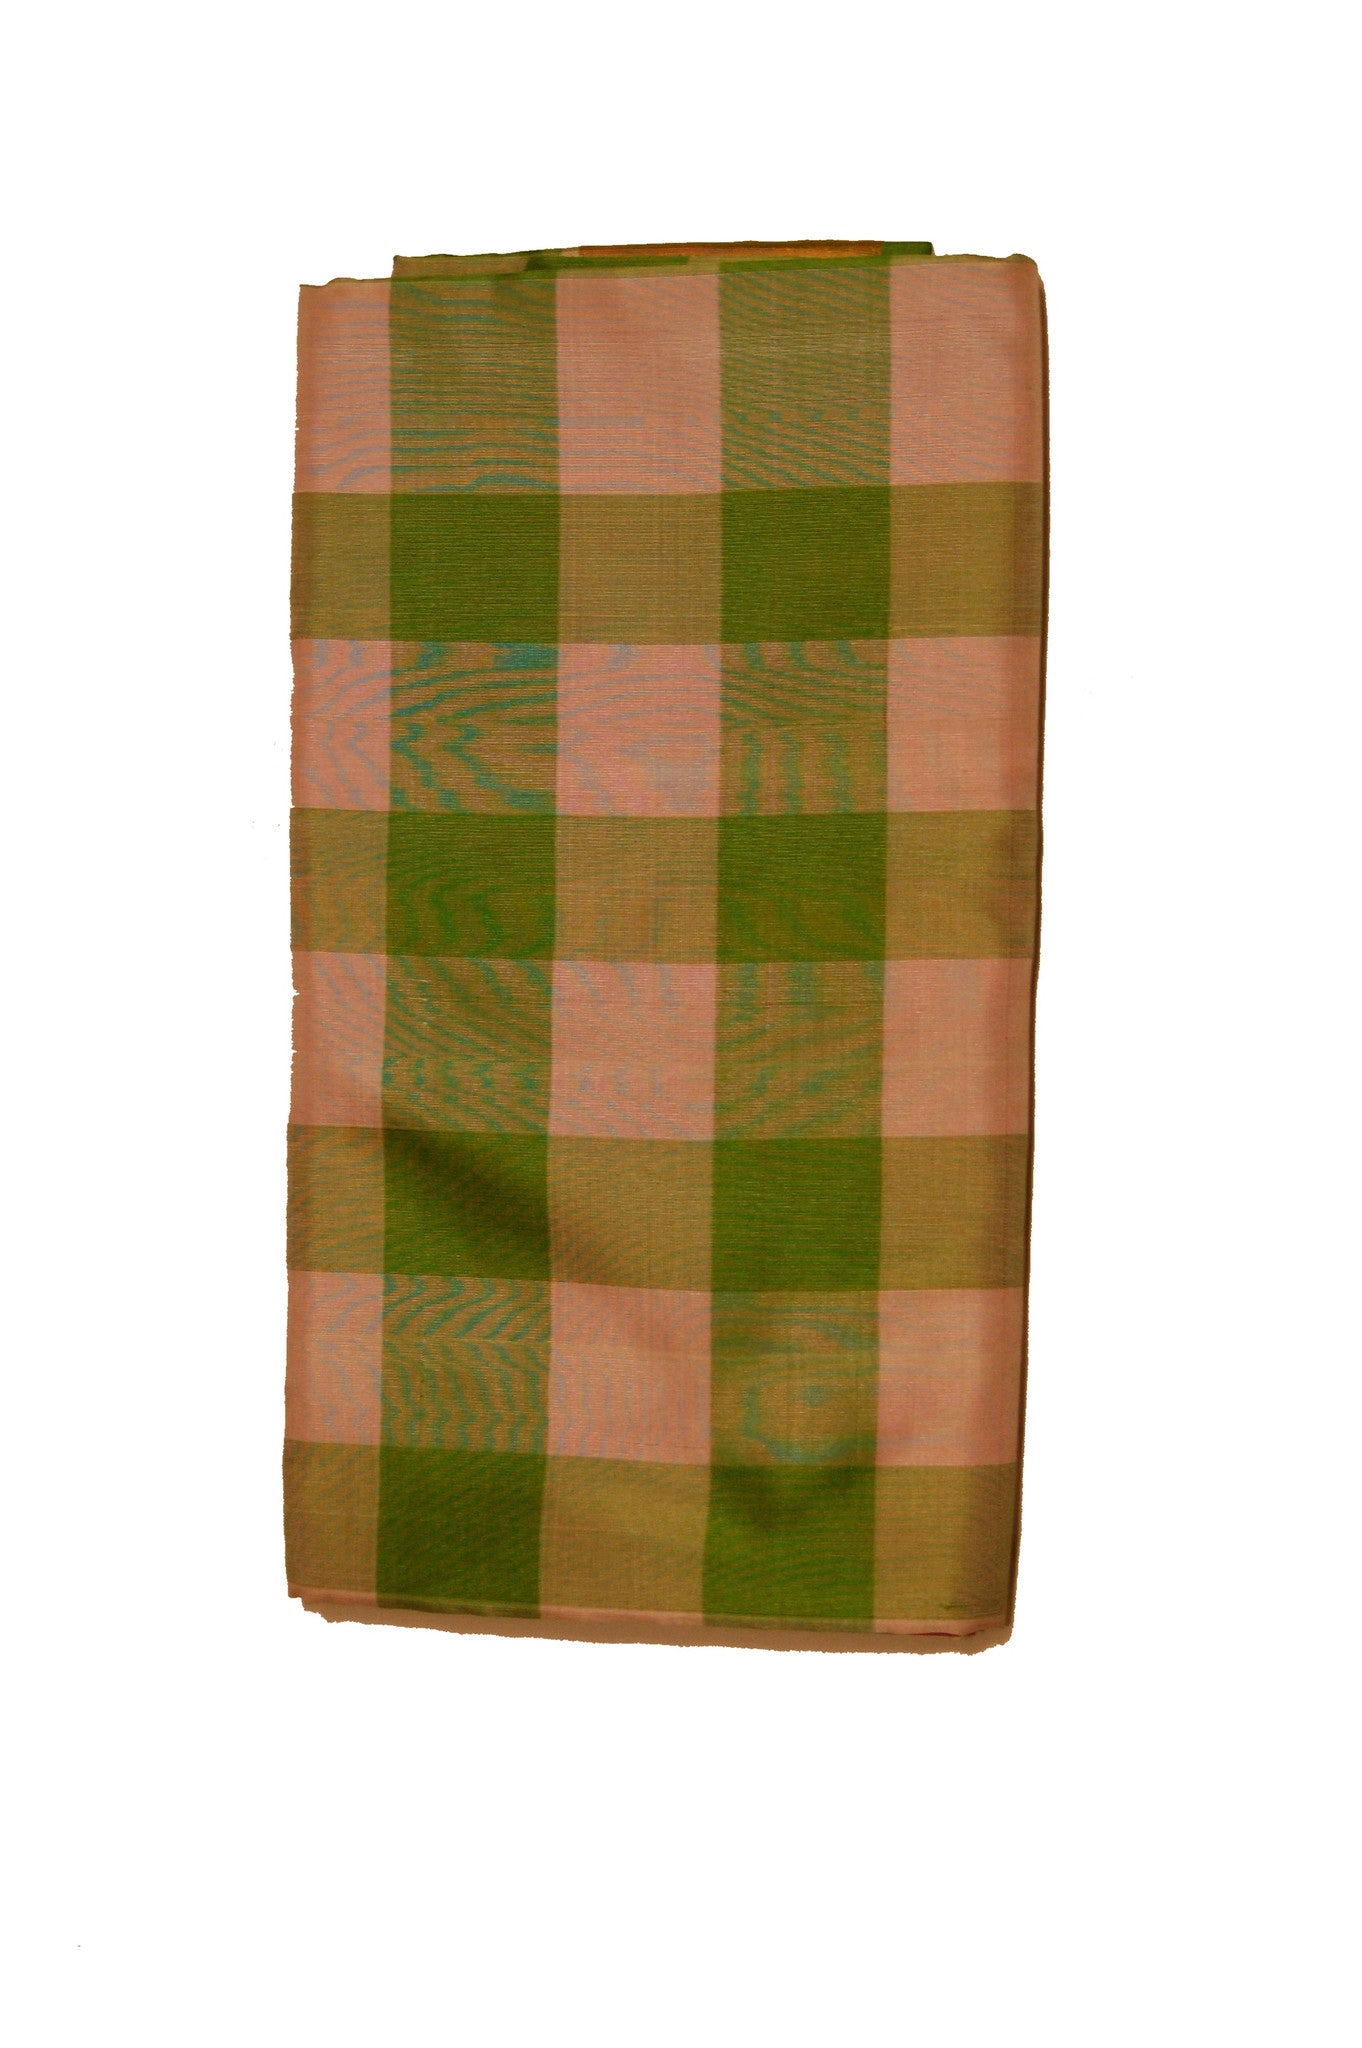 Light weight Uppada Silk Saree in Shades of Green Checkered and Golden Jarri Color - Boutique4India Inc.